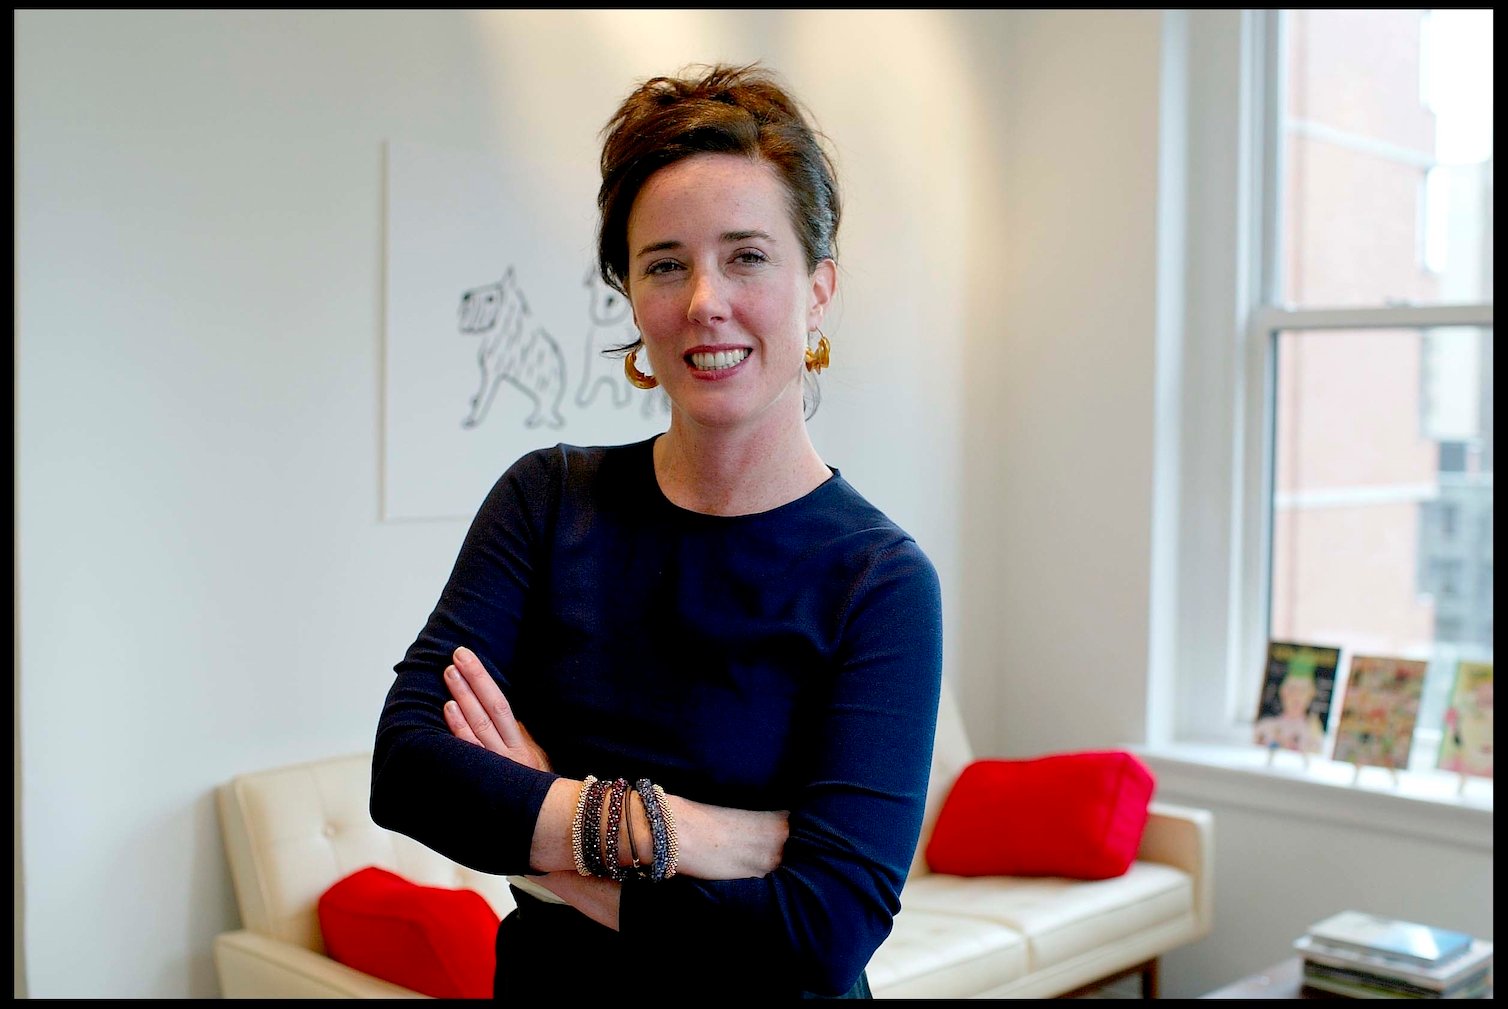 Designer Kate Spade smiling with her arms folded across her chest. Kate Spade's net worth is $200 million.